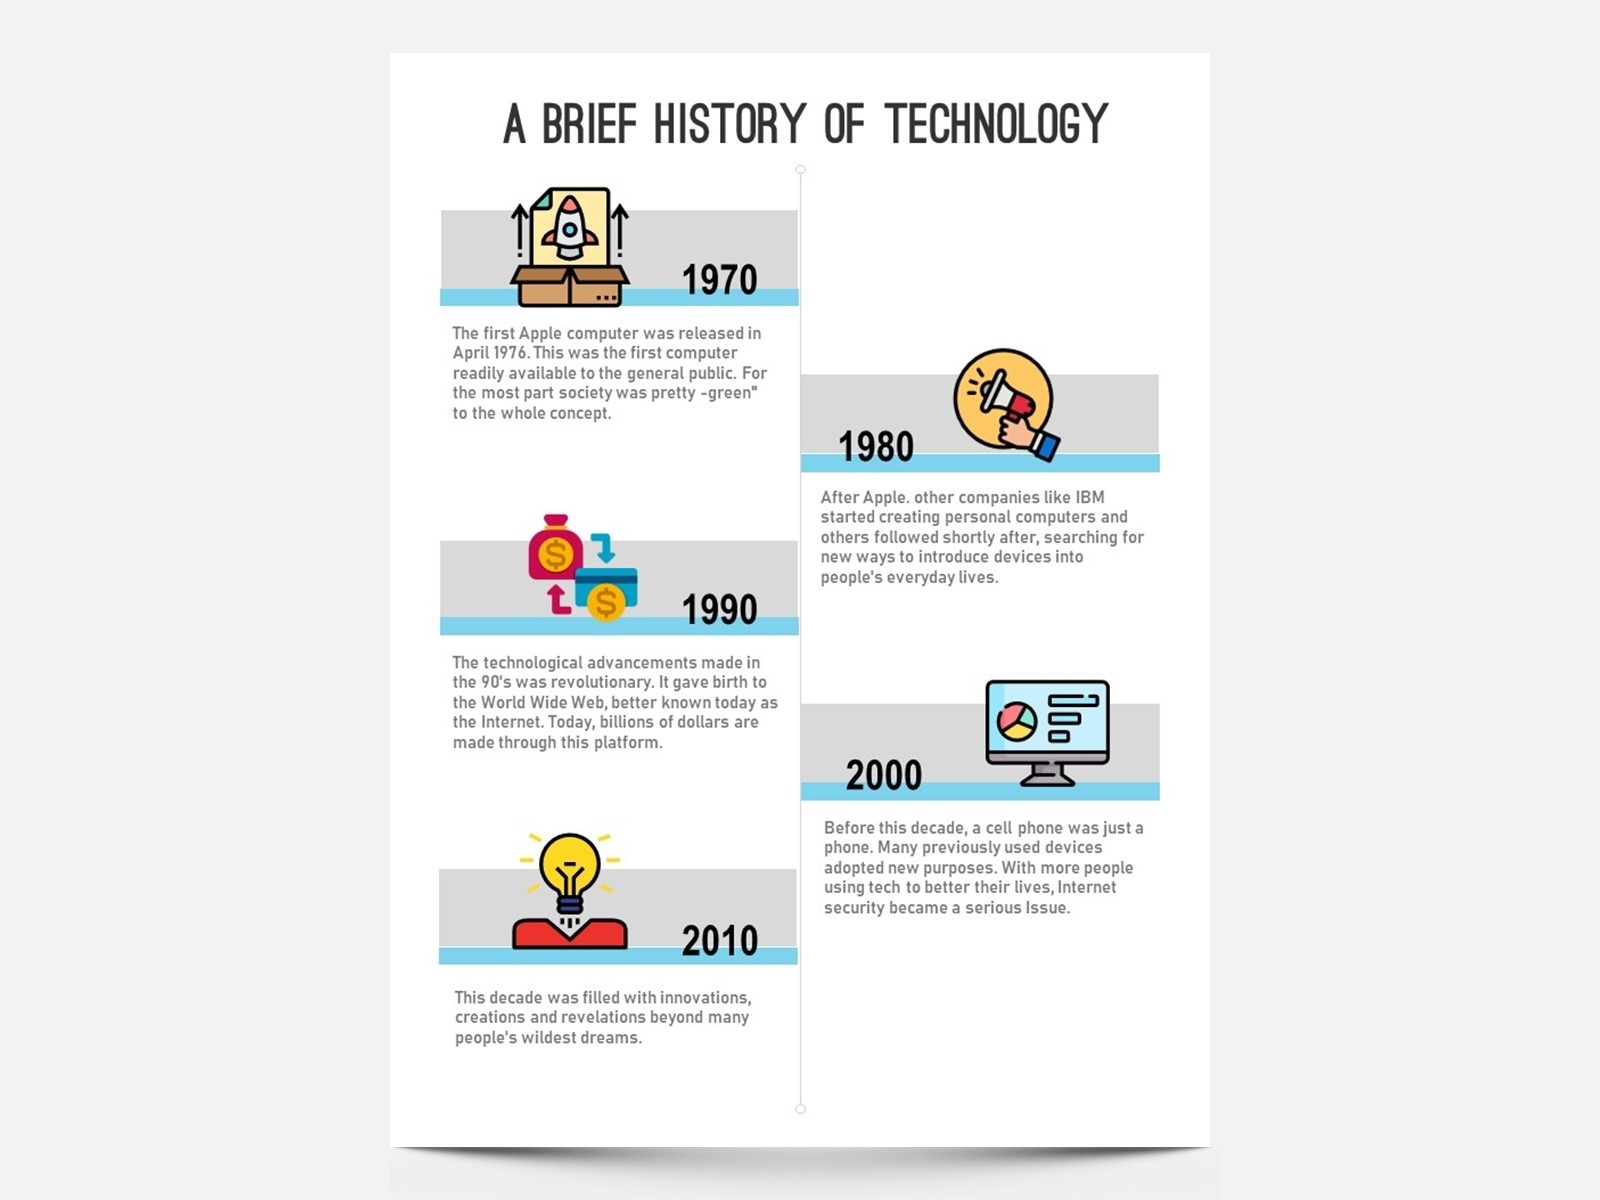 A Brief Timeline Info-graphics by Tanmoy Tanu on Dribbble